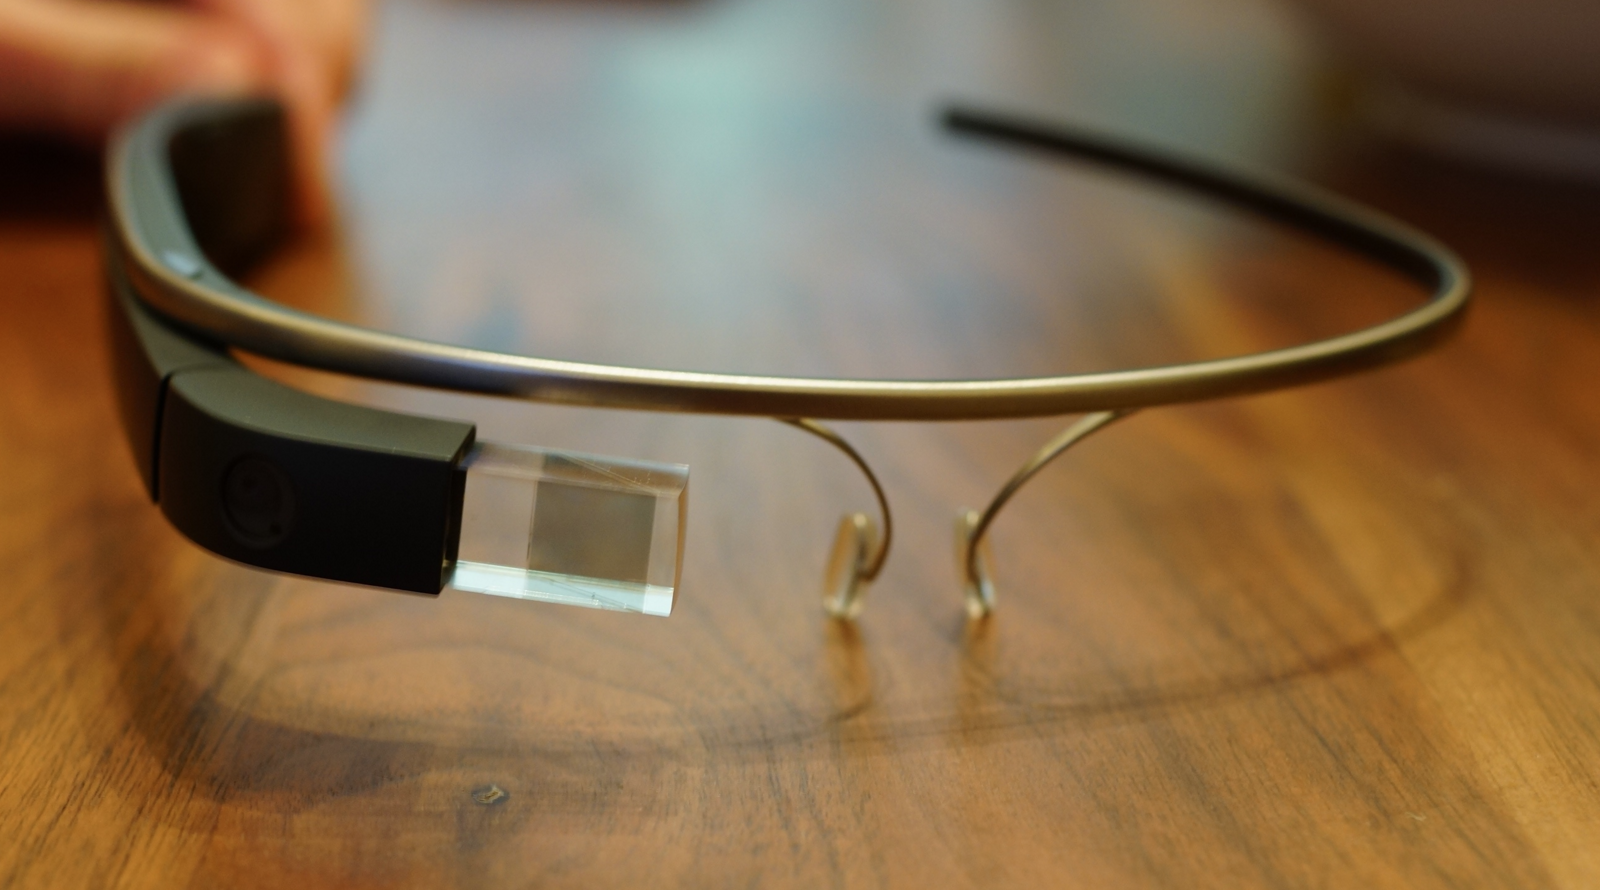 Giving Autistic Kids Superpowers Via Google Glass